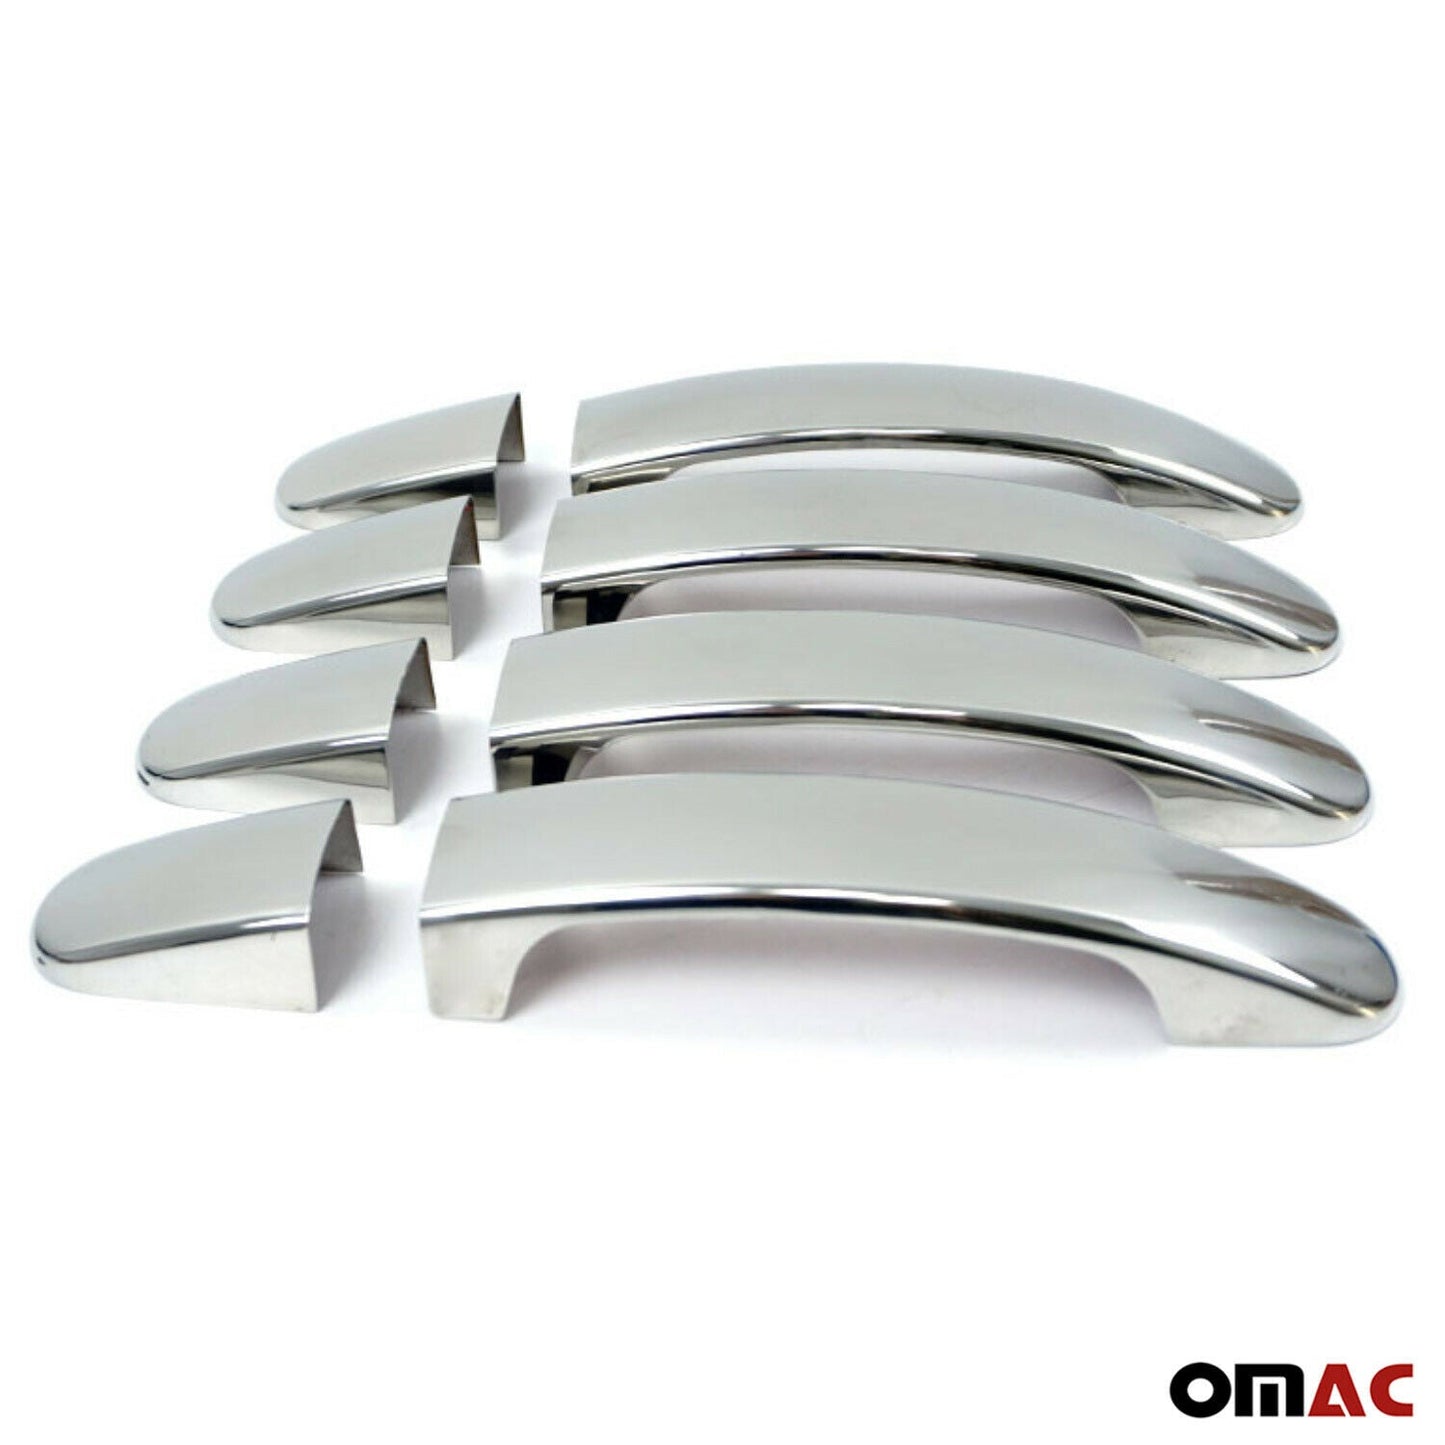 OMAC Fits Ford Transit 150 2015-2021 Chrome Side Door Handle Cover S.Steel 8 Pcs 2624041